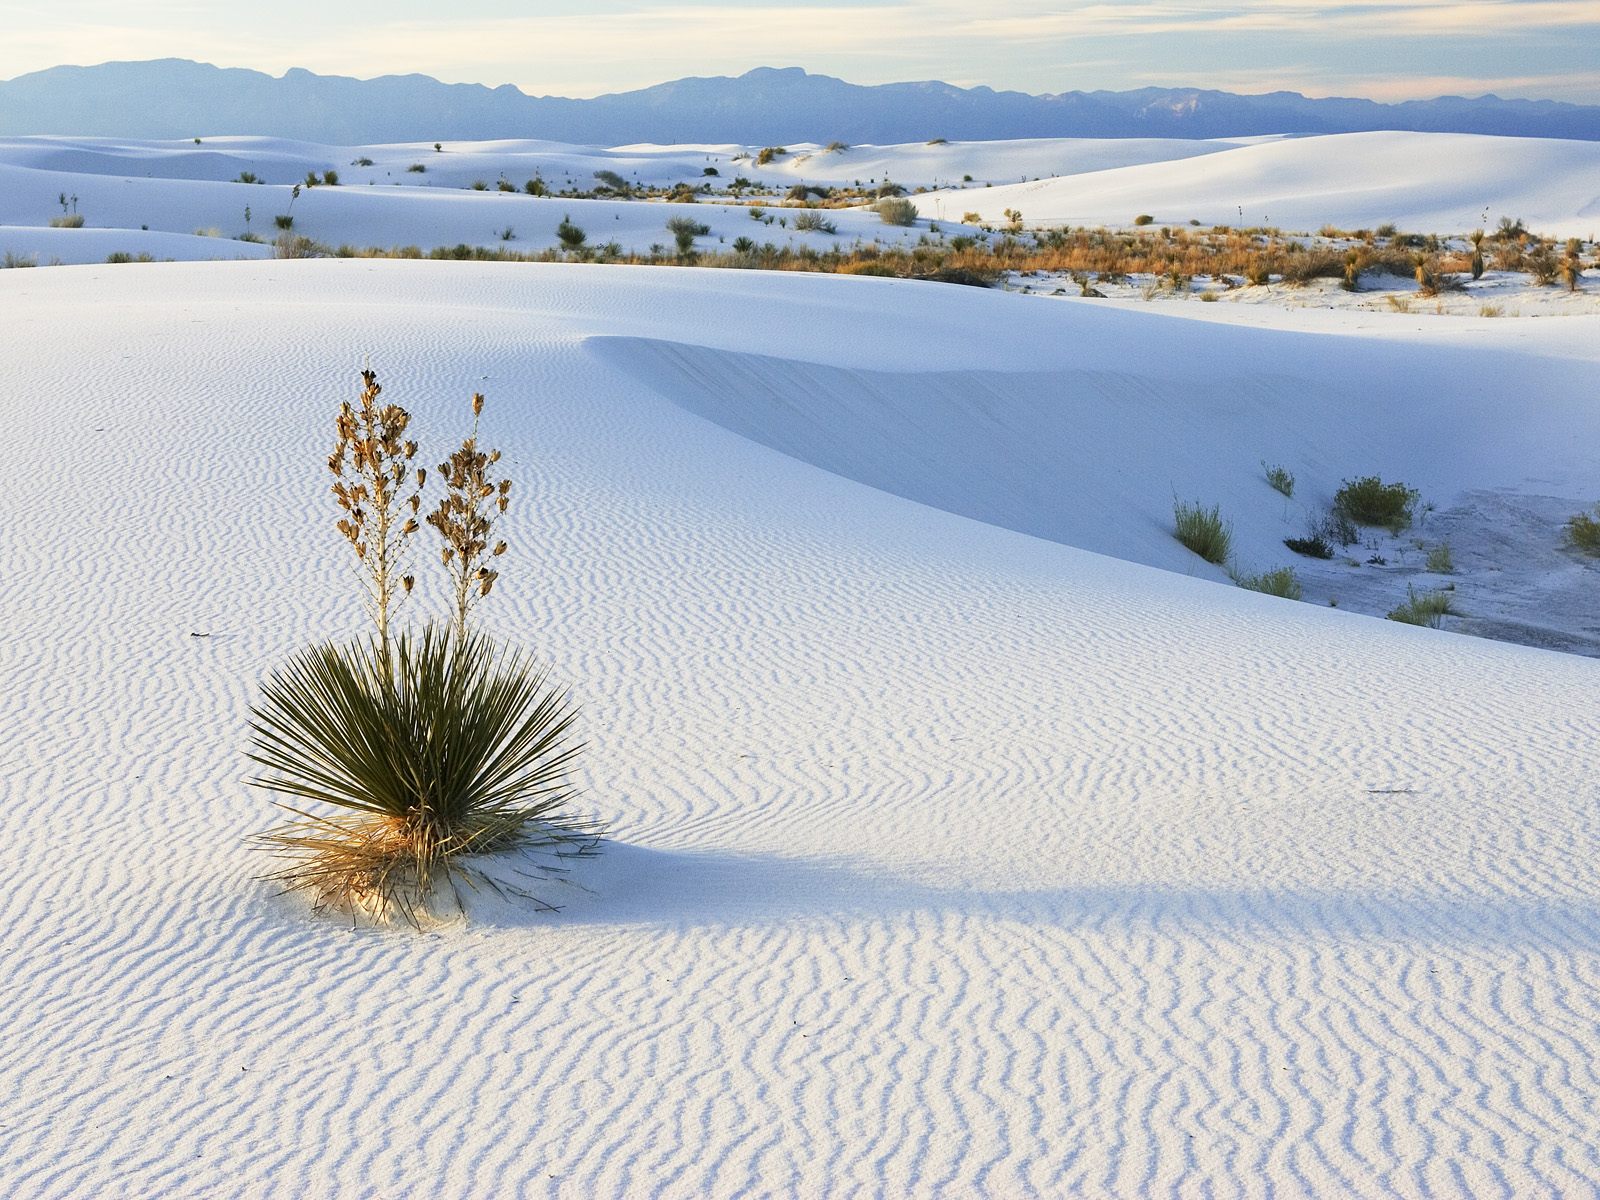 Download HQ Soaptree Yucca Growing in Gypsum Sand, White Sands National Monument, New Mexico Deserts wallpaper / 1600x1200